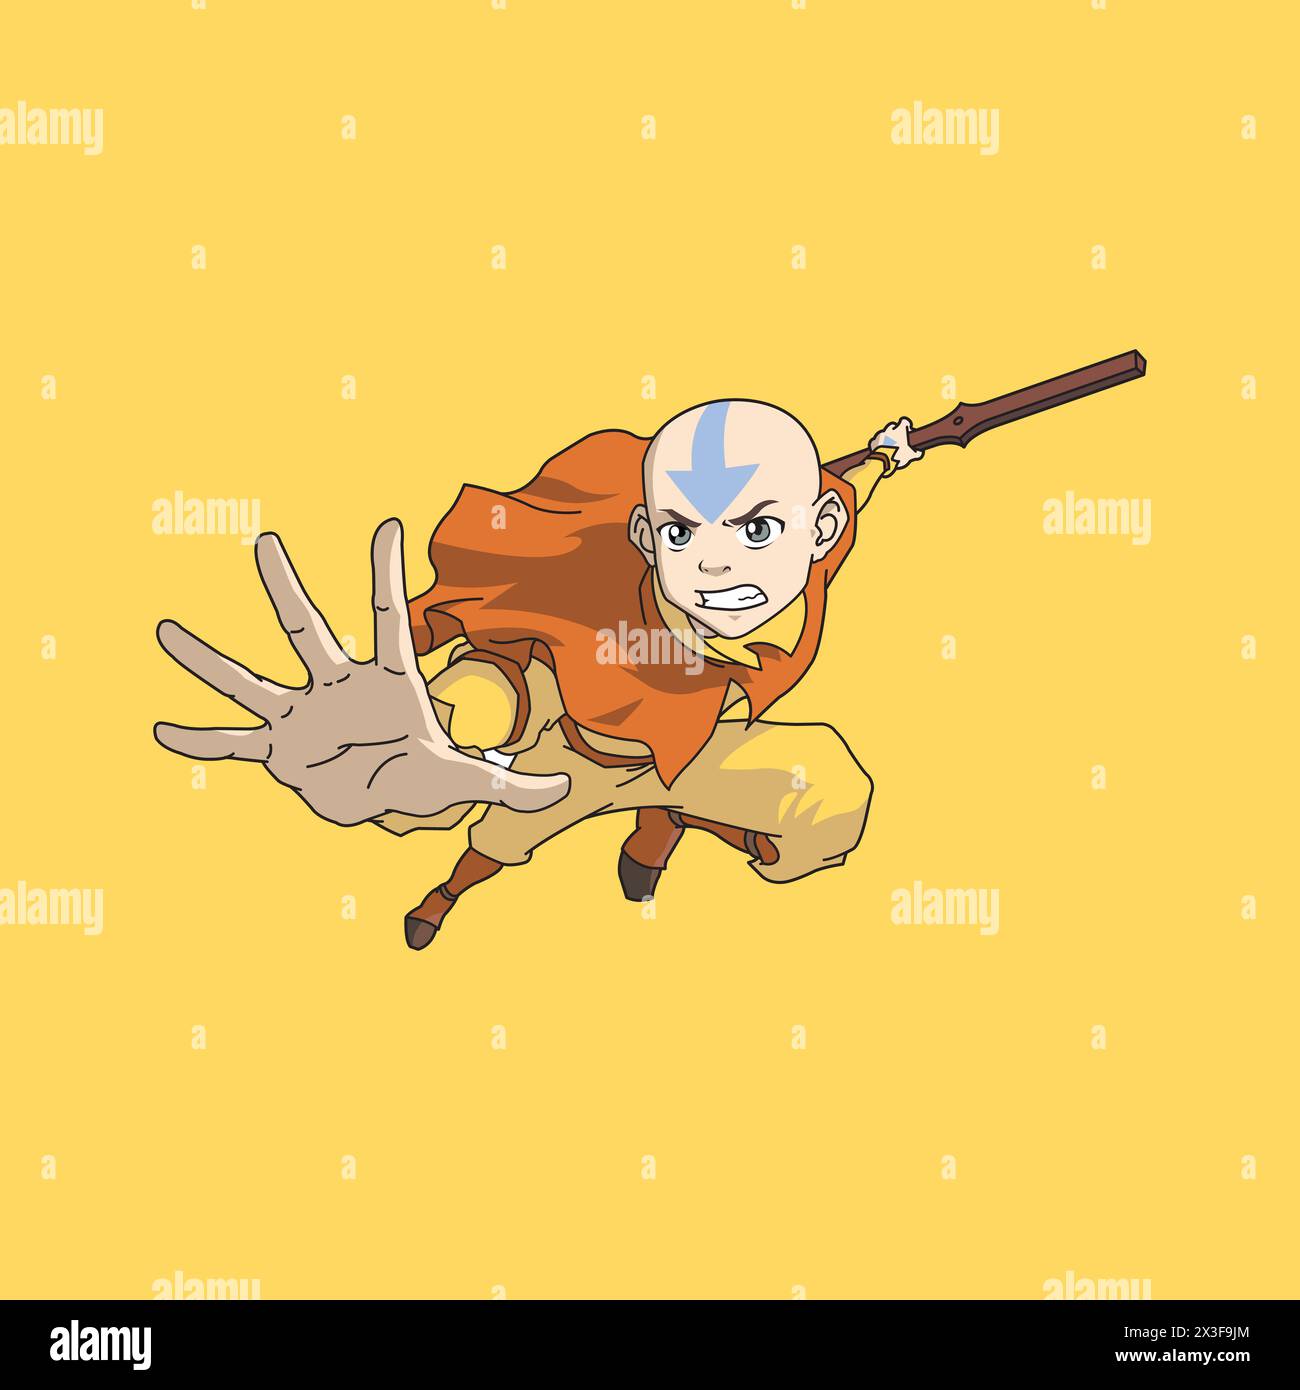 Avatar the legend of aang vector illustration Stock Vector